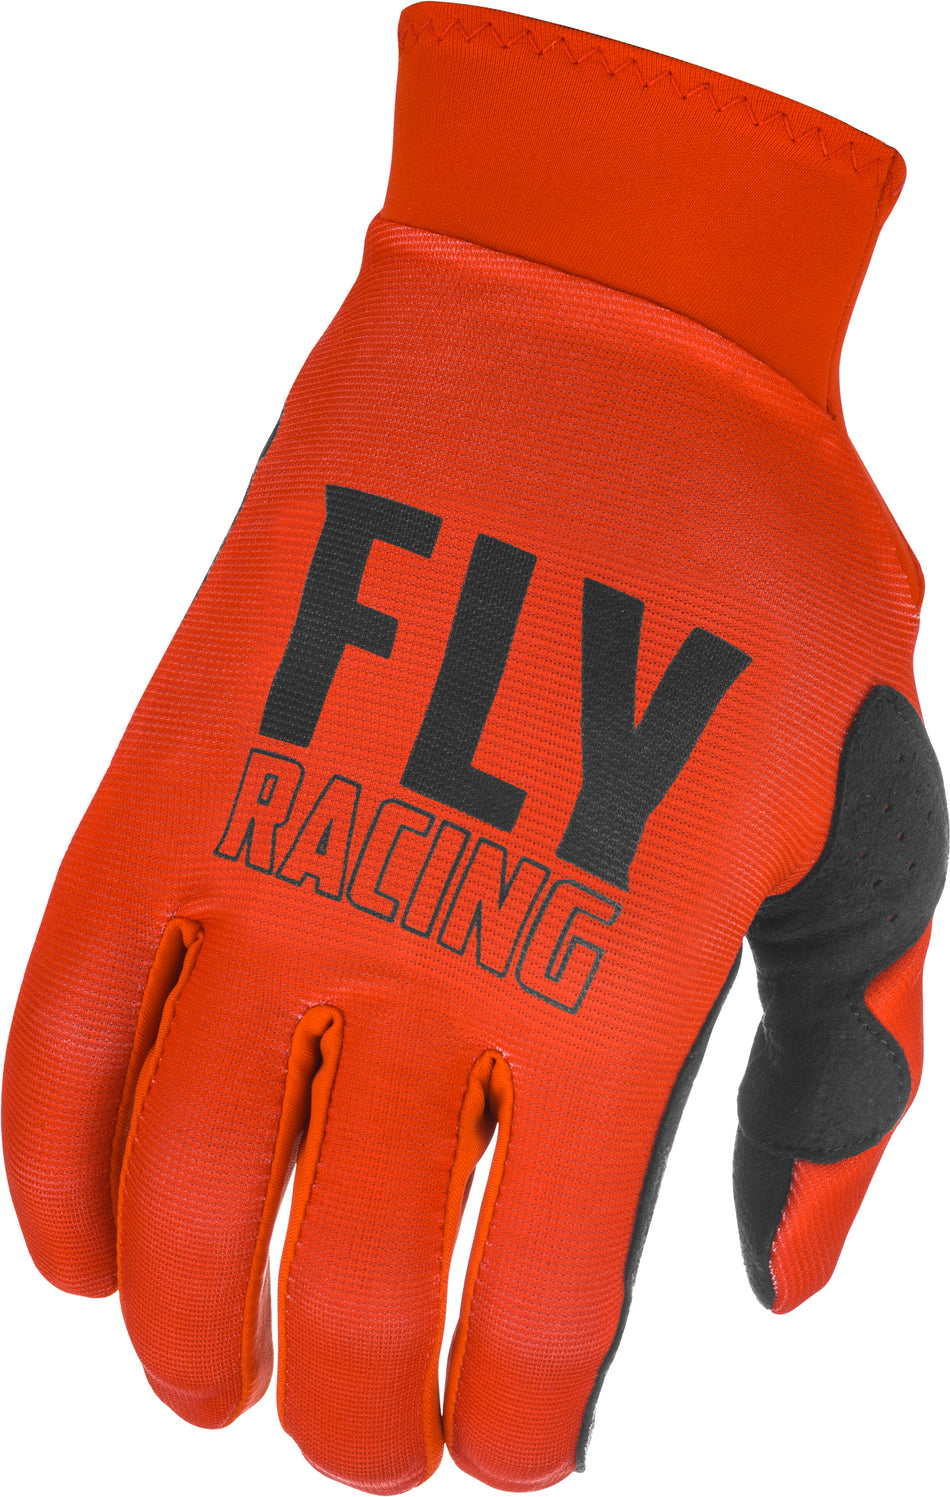 FLY RACING Pro Lite Gloves Red/Black Xl 374-852X